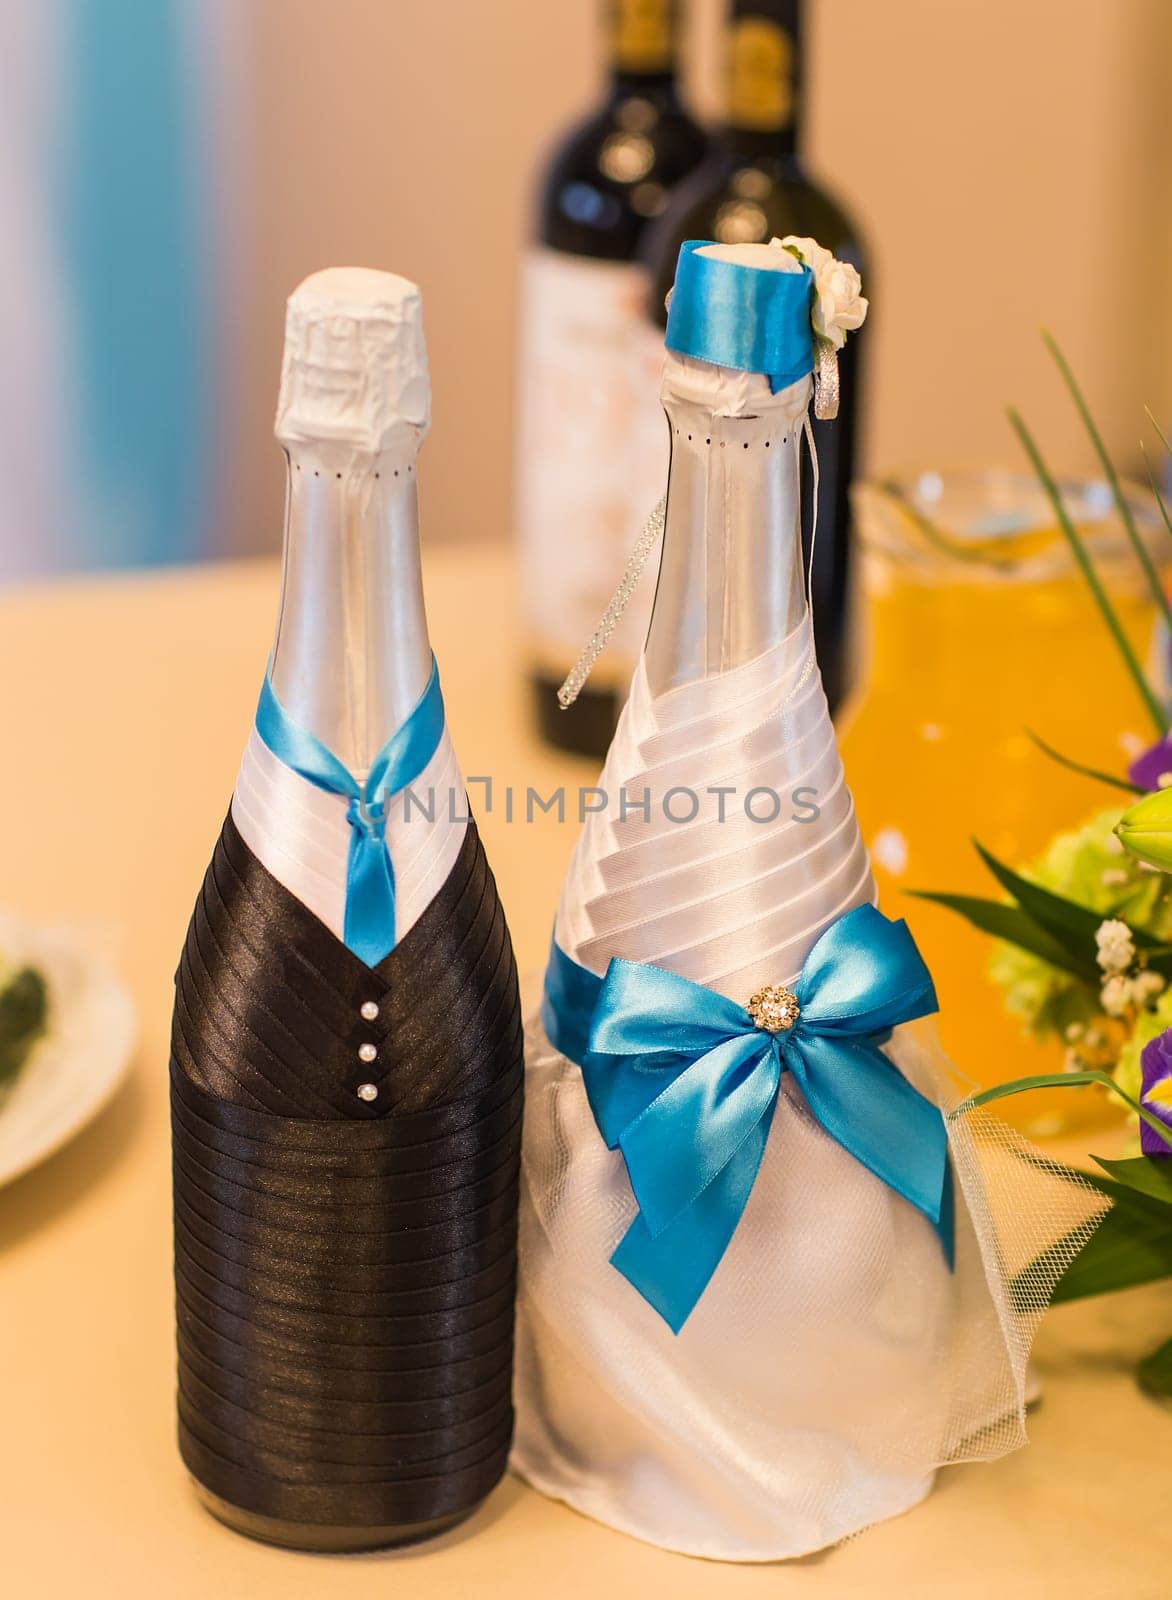 Decorated wedding bottle of champagne by Satura86